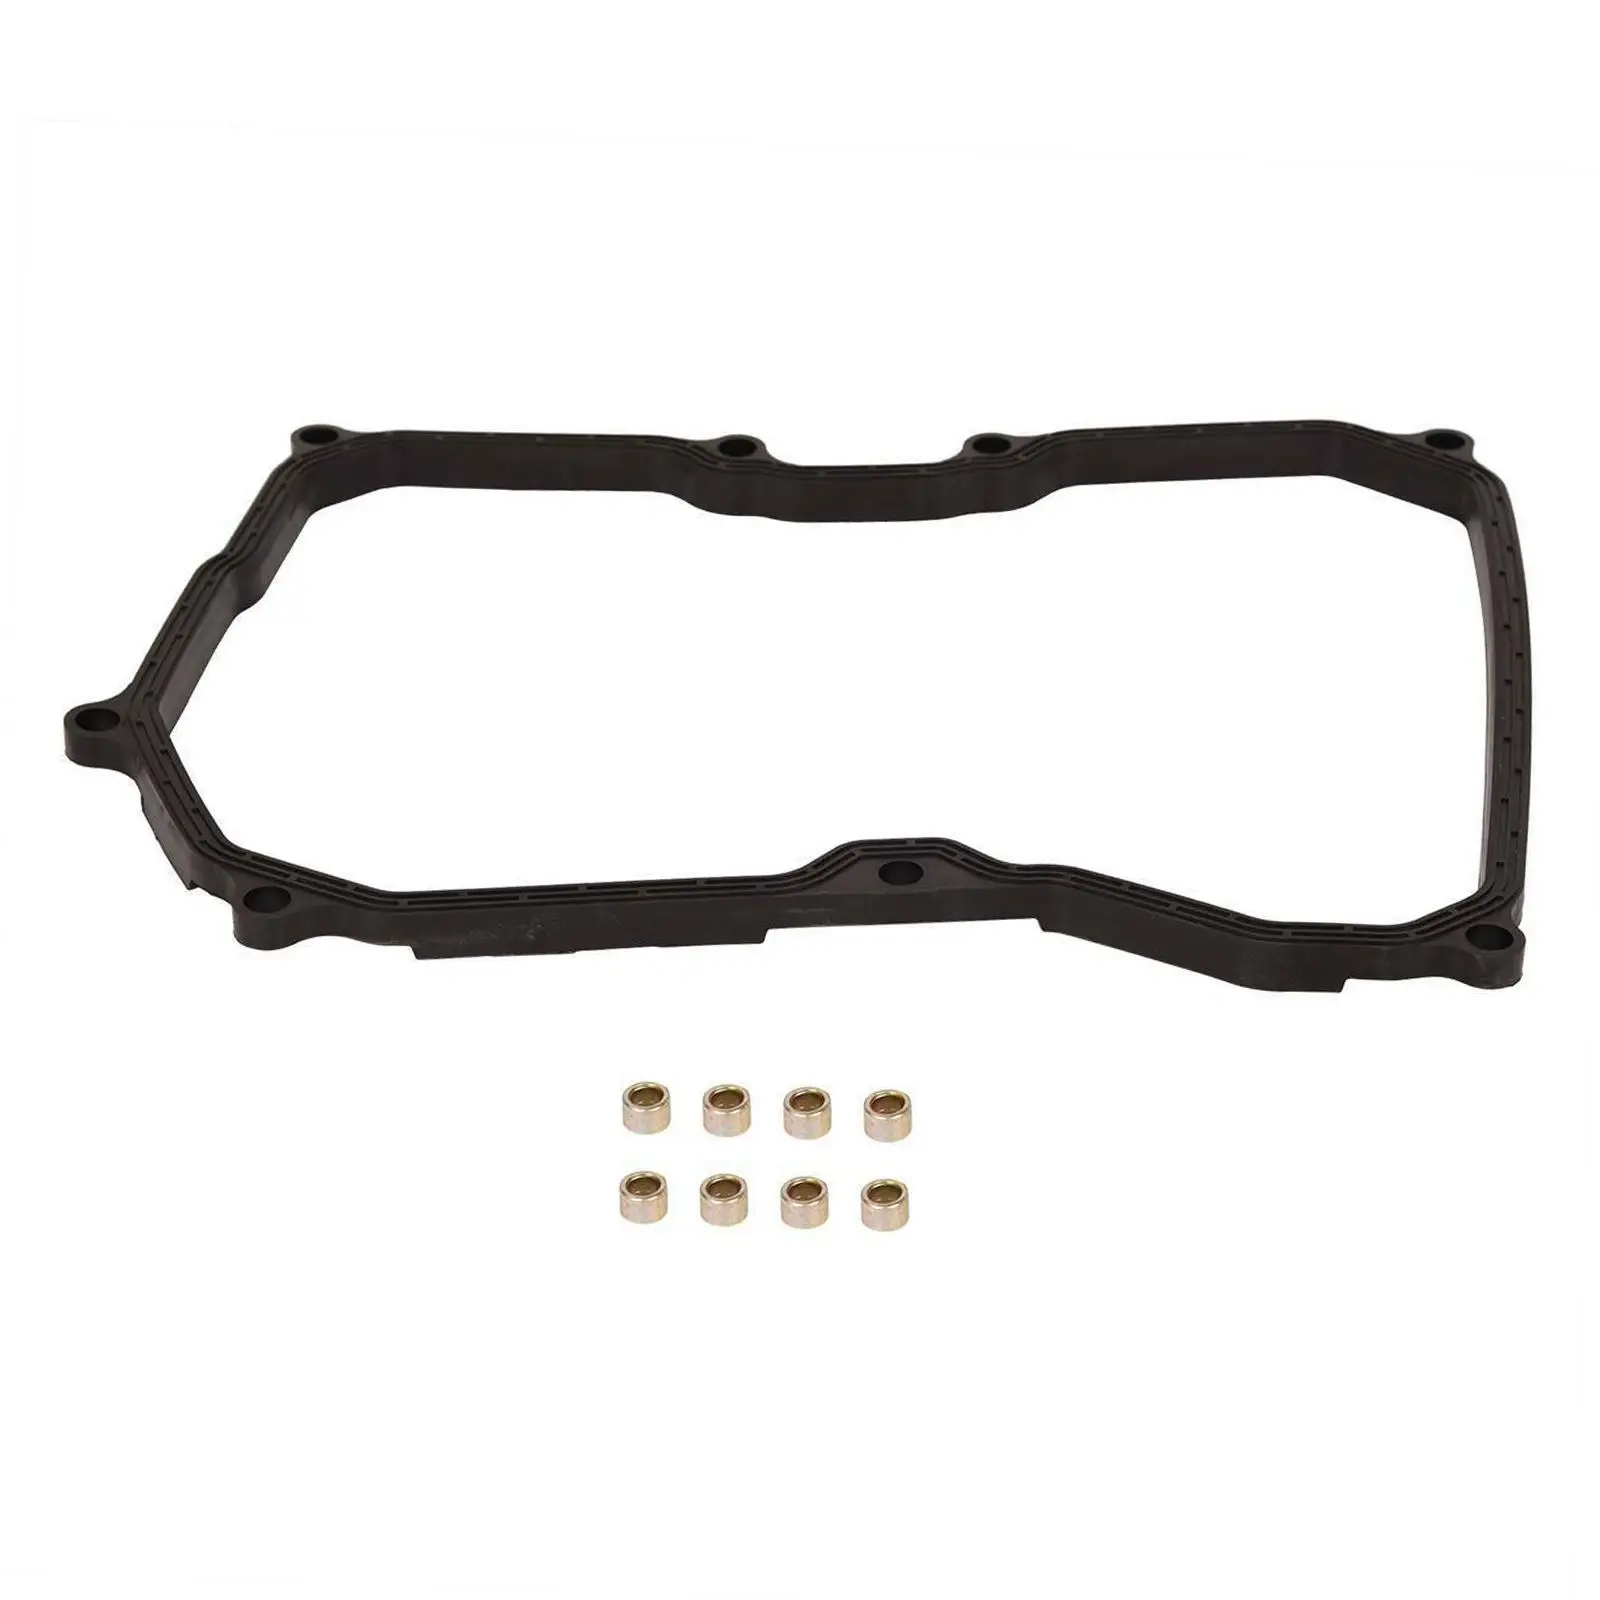 Transmission Pan Gasket, Lightweight Durable, 24117566356, Fit for Mini Parts